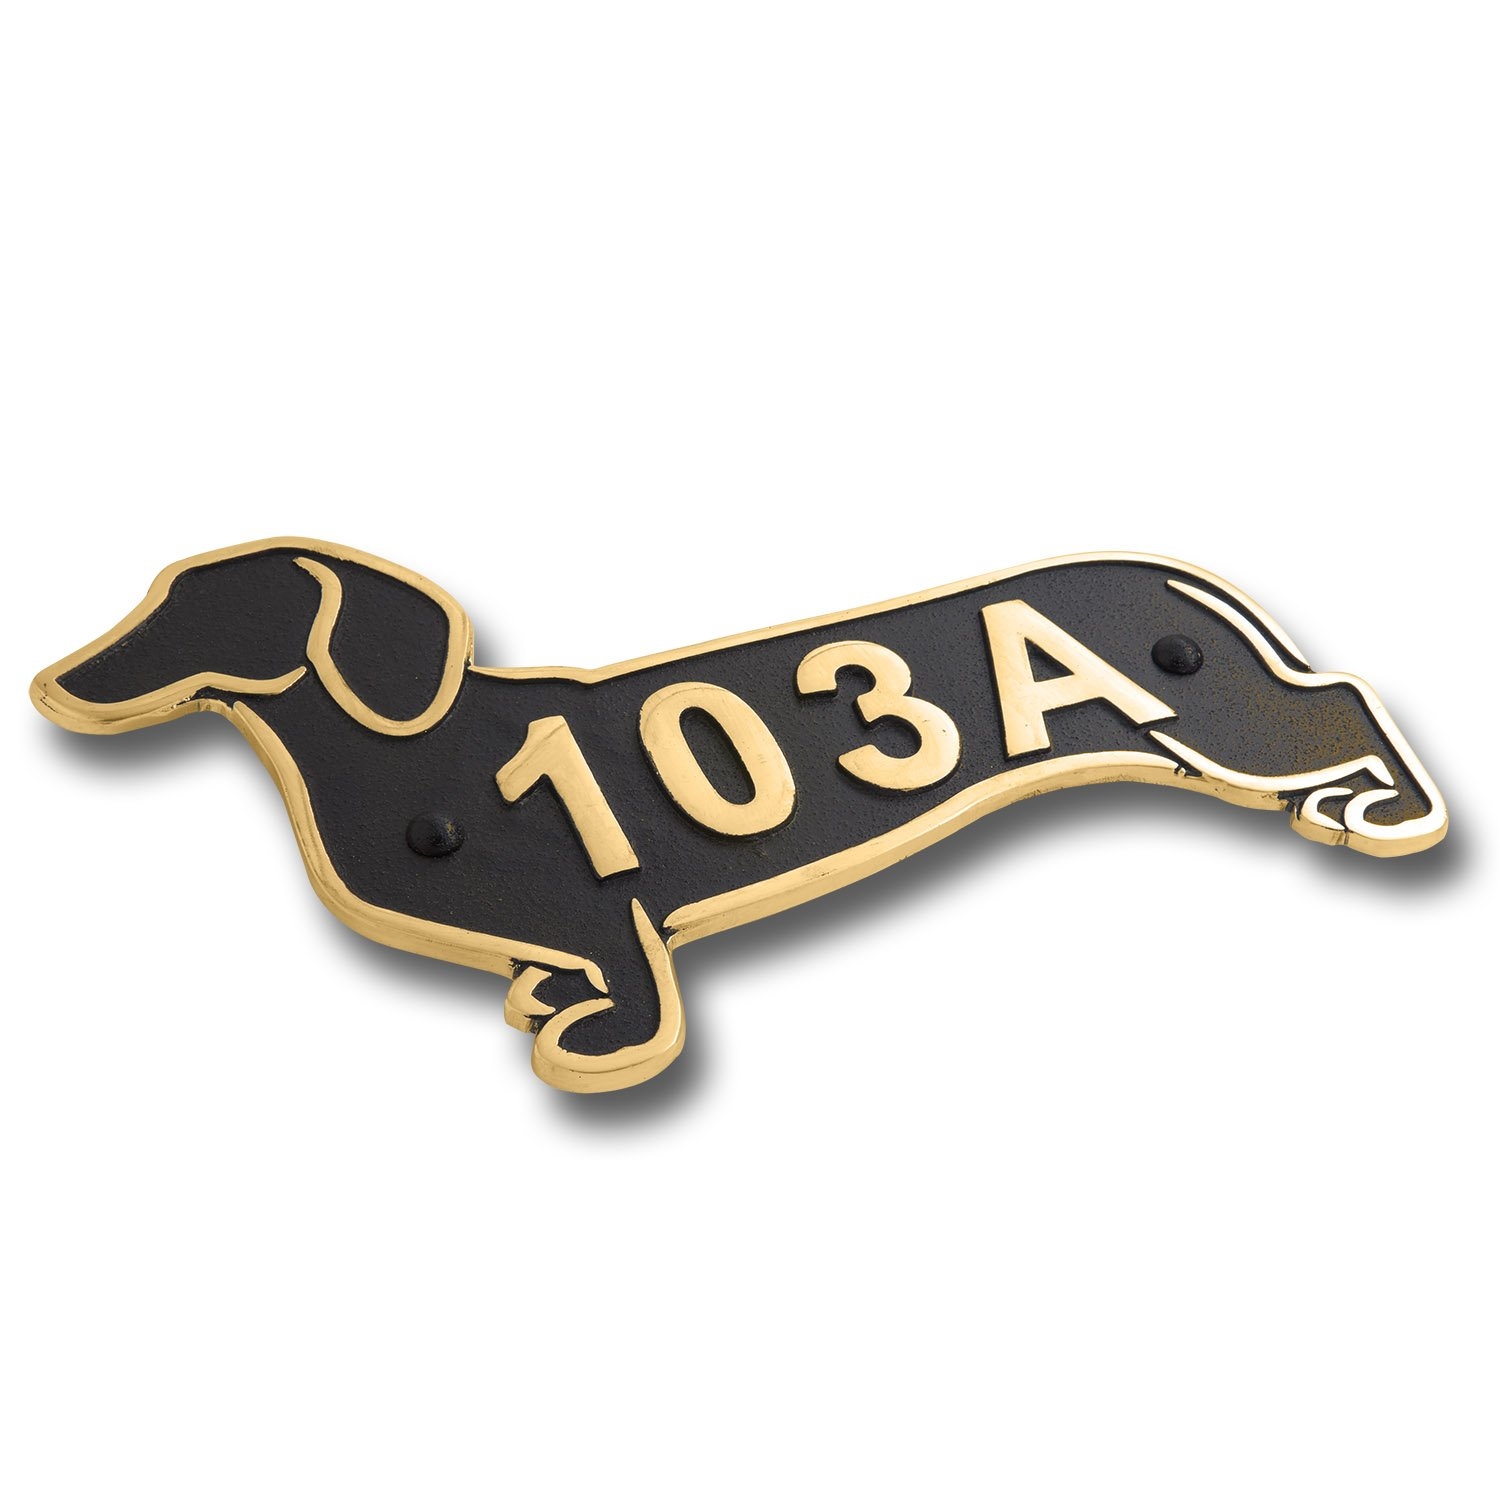 Dachshund Metal House Number Address Plaque. Sausage Dog Gift Idea For A Dachshund Owner. Yard Or Garden Dachshund Décor Makes A Great Gift For Him Or Her – Brass & Red